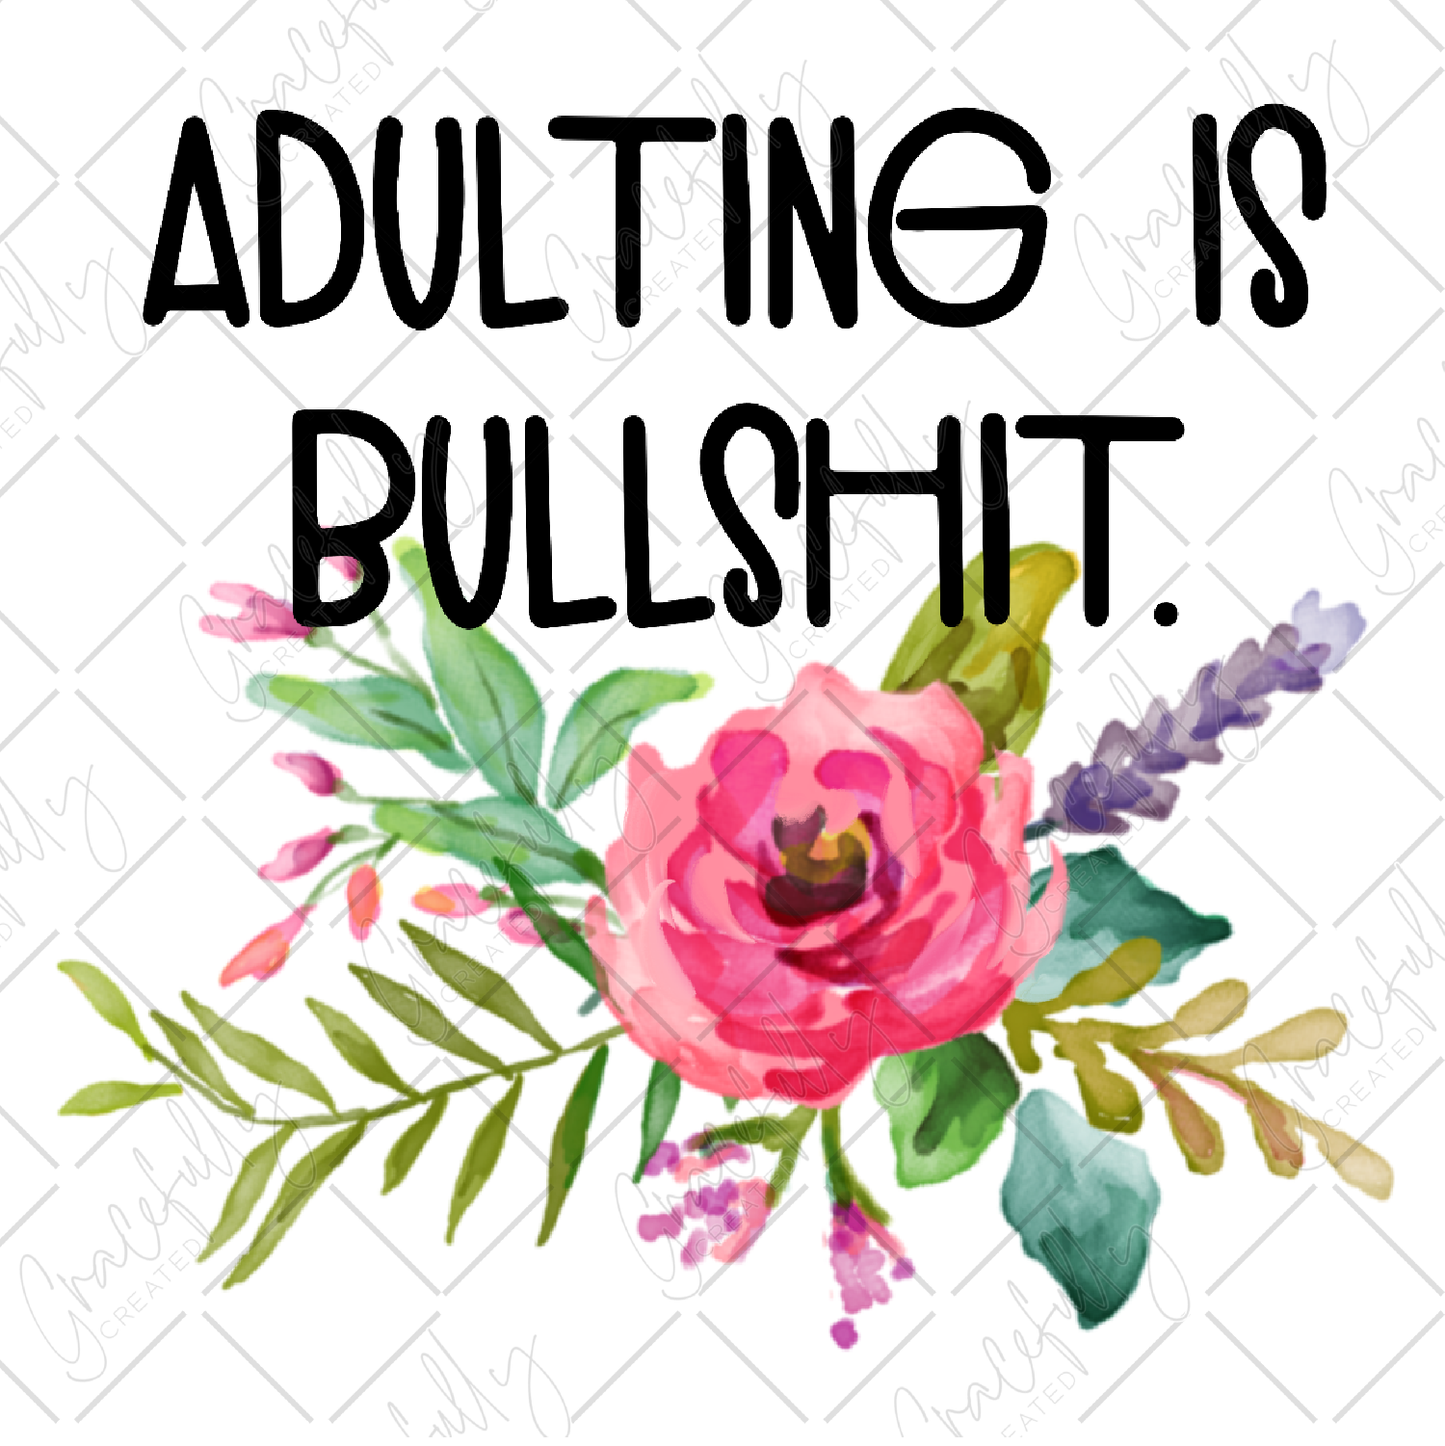 A48 Adulting is Bull****